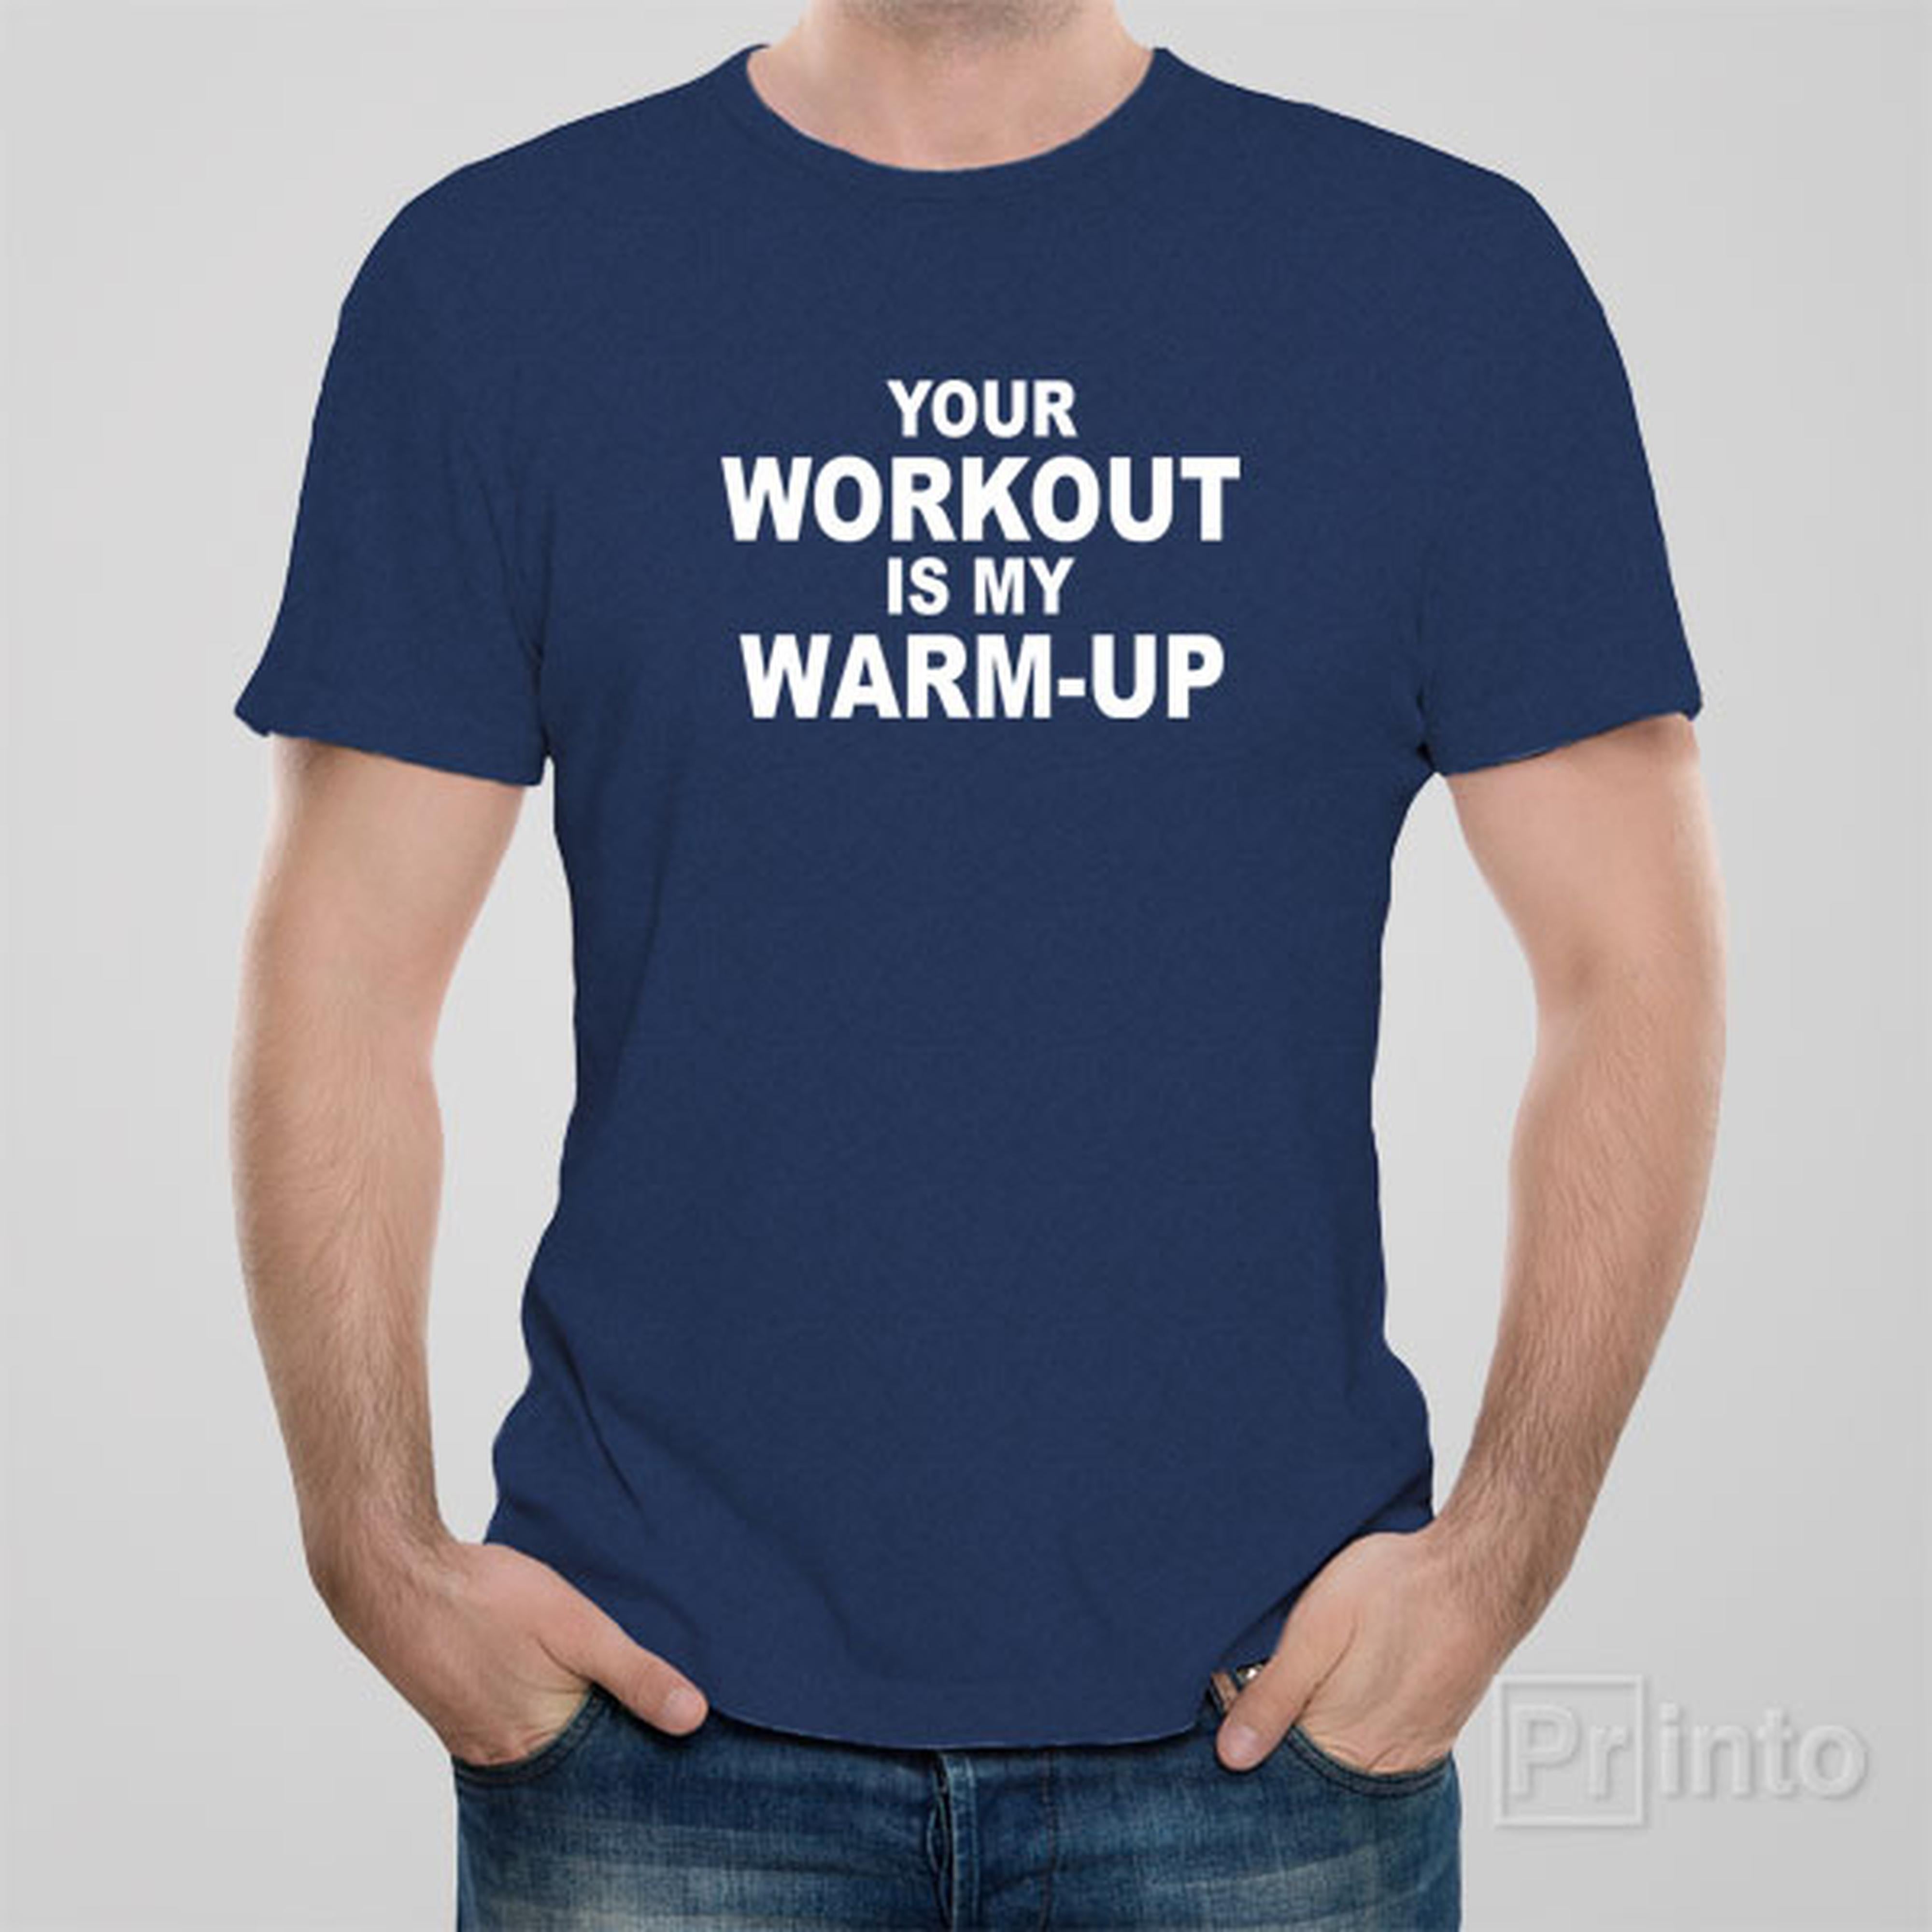 your-workout-is-my-warm-up-t-shirt